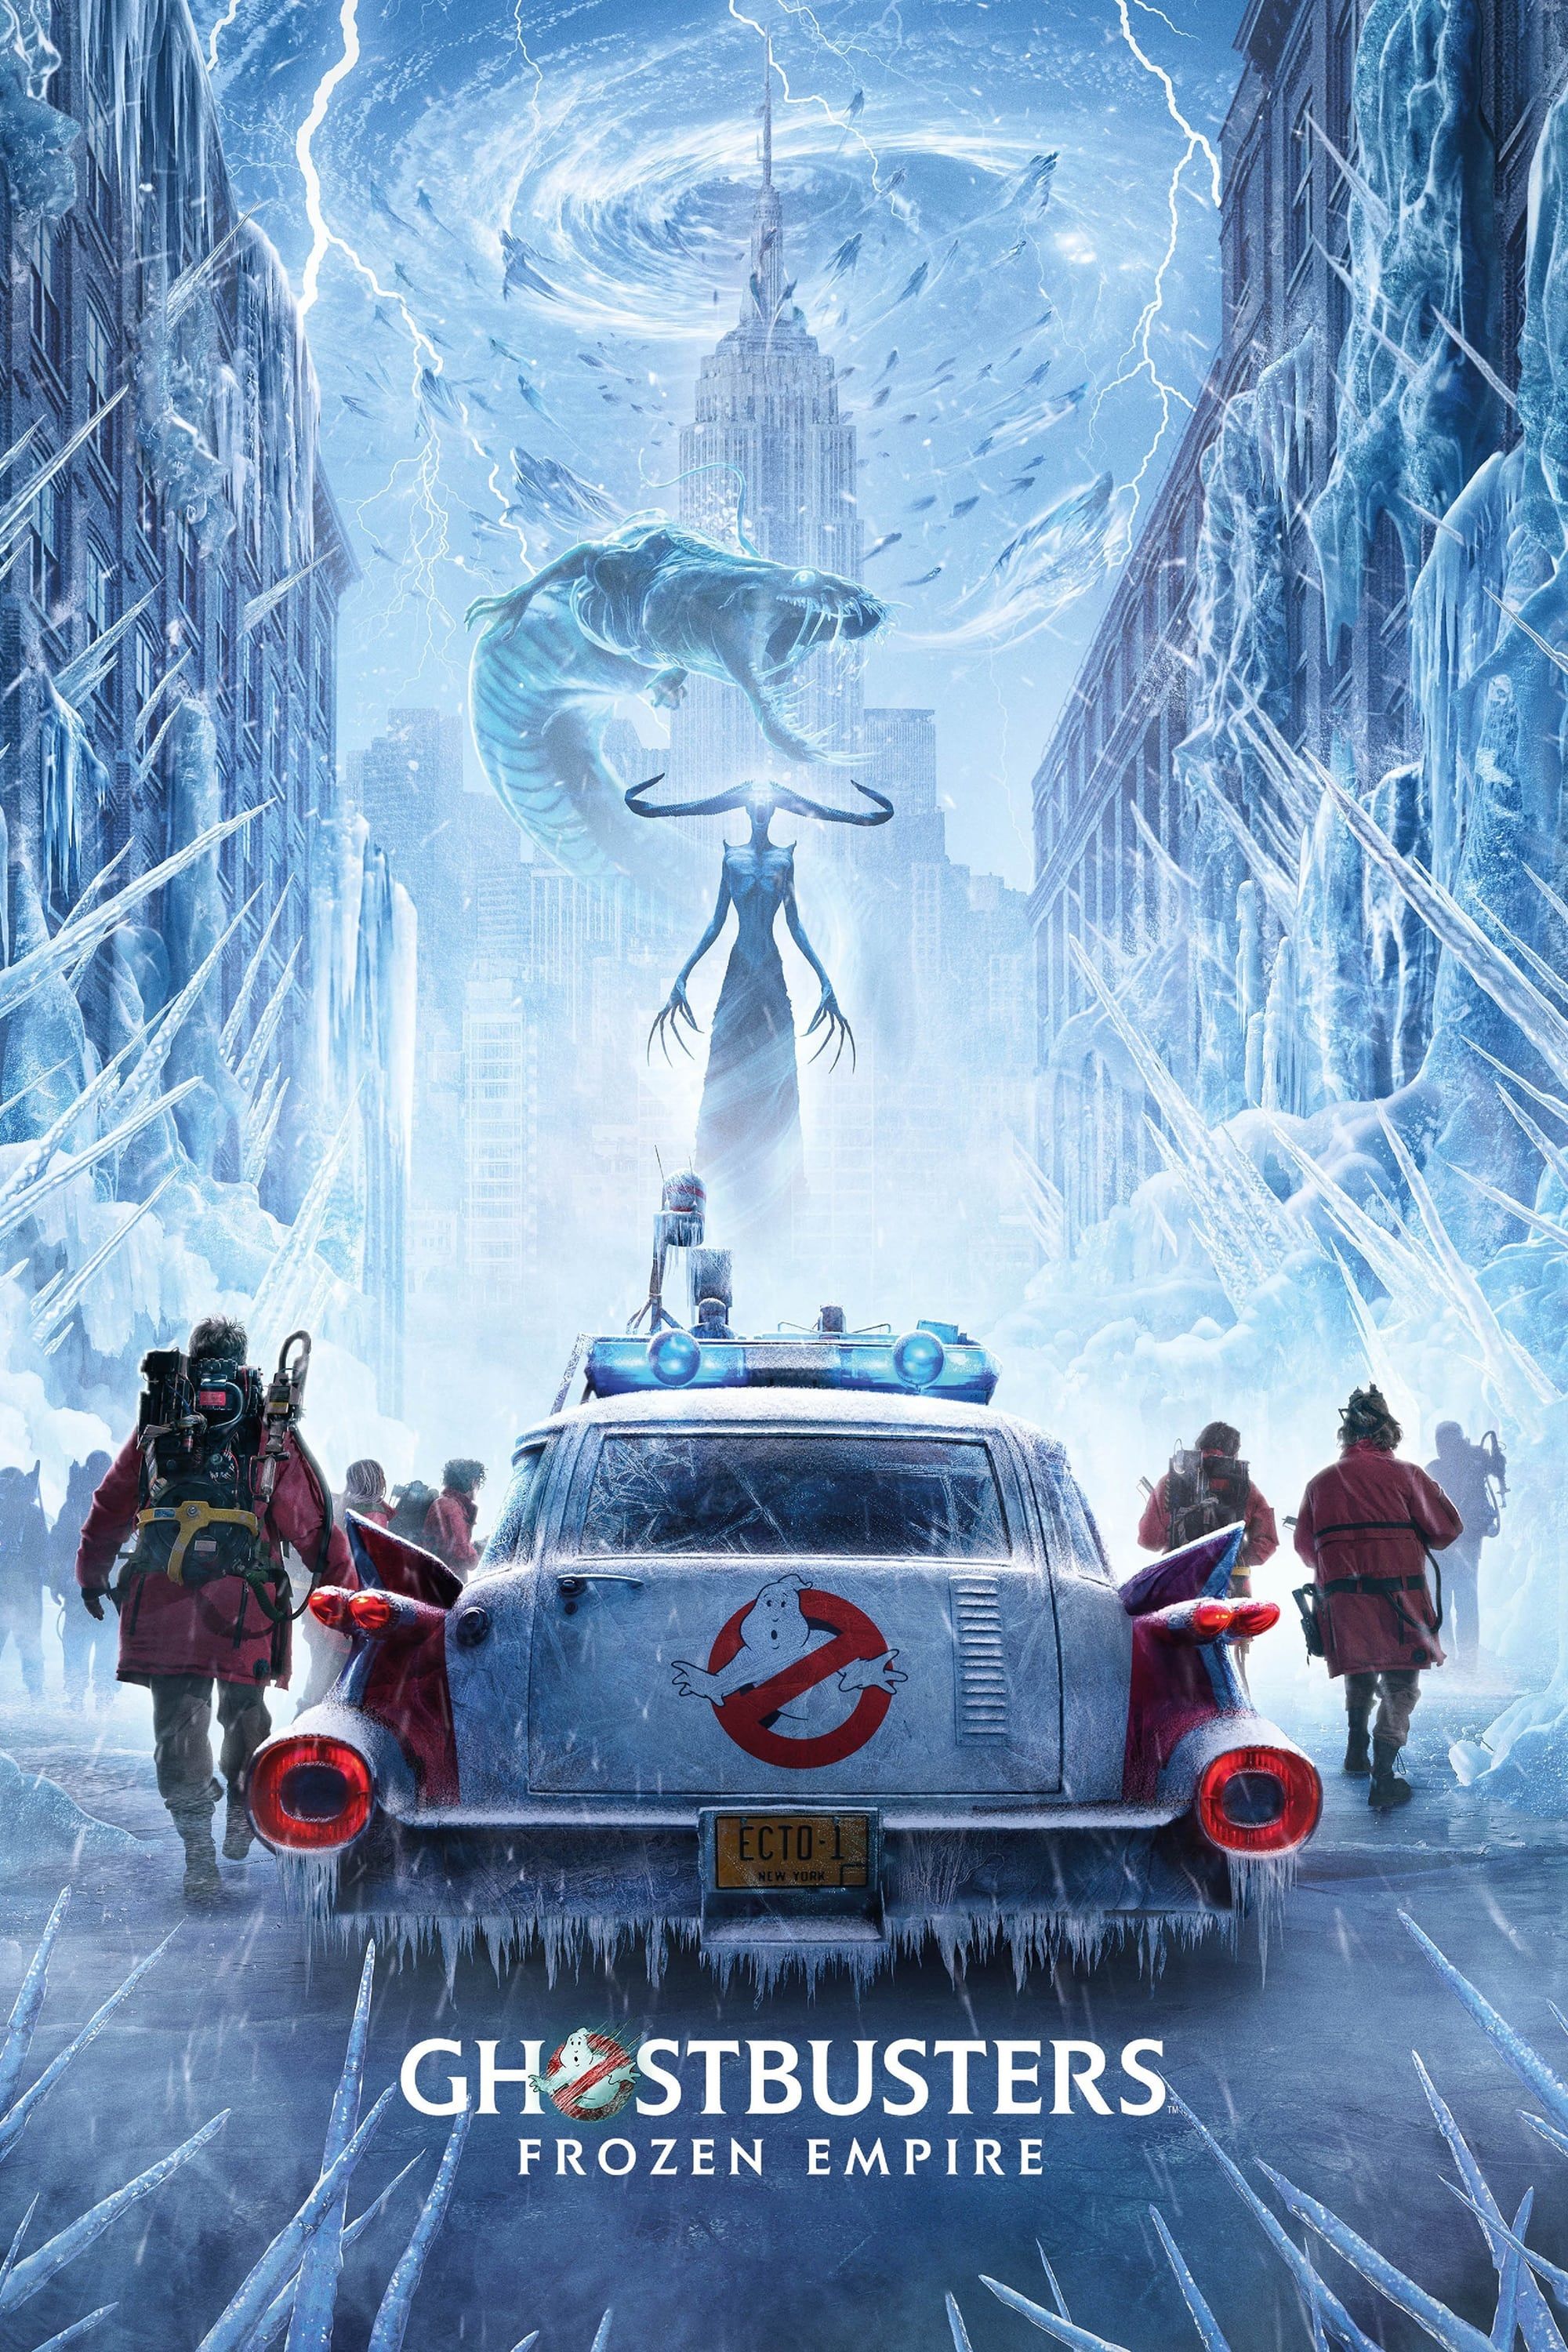 Ghostbusters Frozen Empire poster featuring the crew emerging from Ecto 1 and facing ice creatures in New York